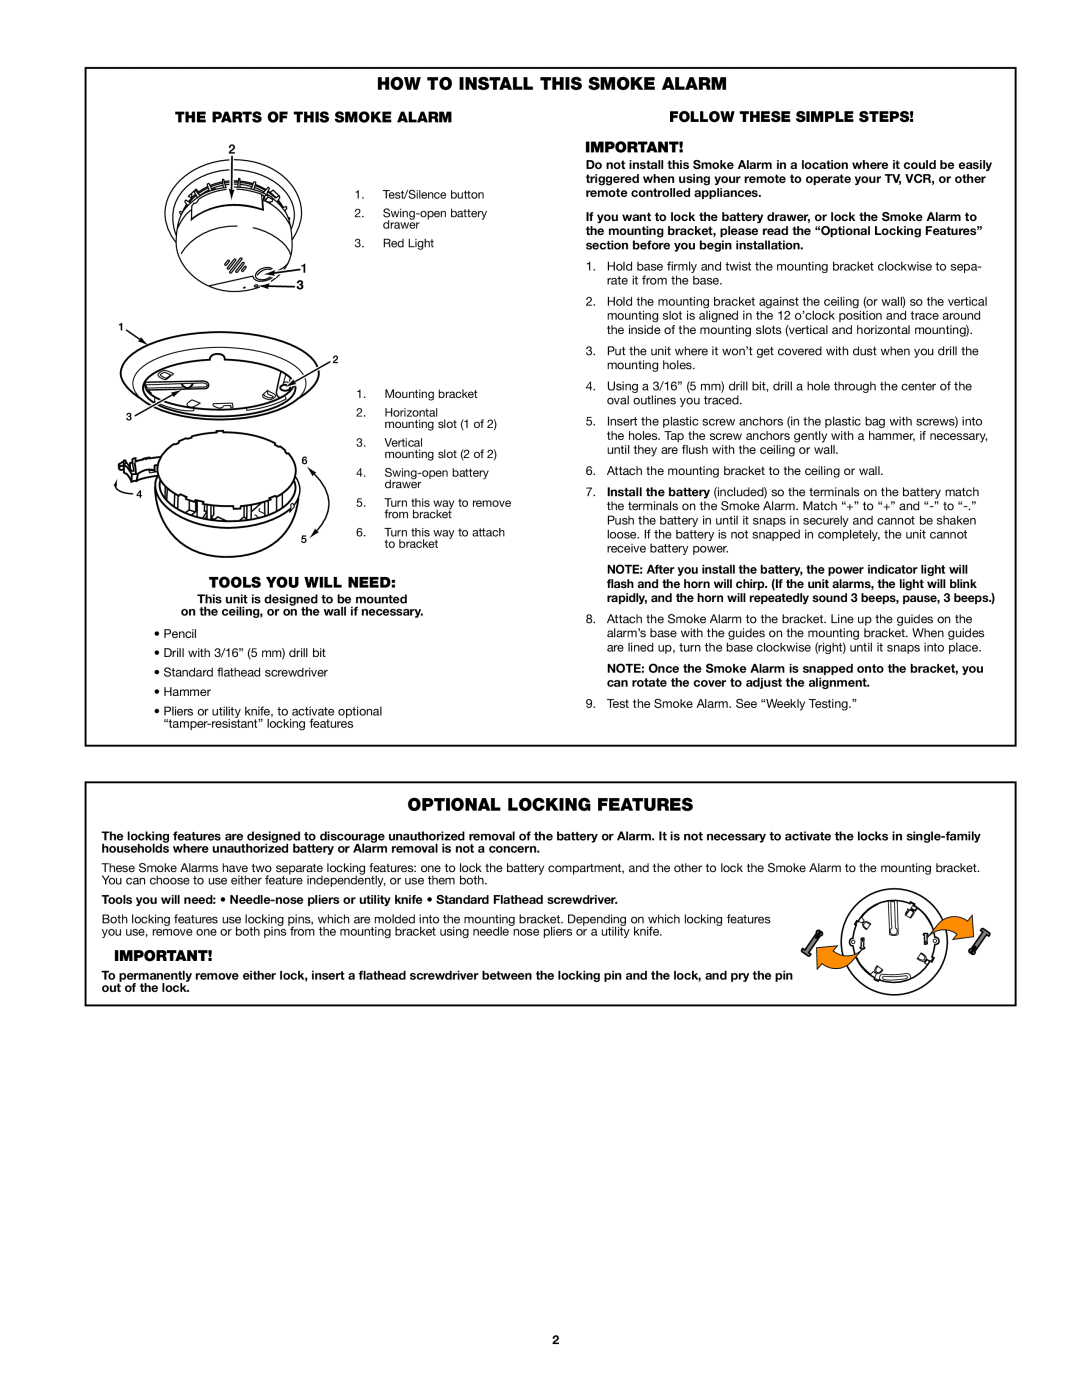 First Alert SA302 user manual How To Install This Smoke Alarm, Optional Locking Features, The Parts Of This Smoke Alarm 